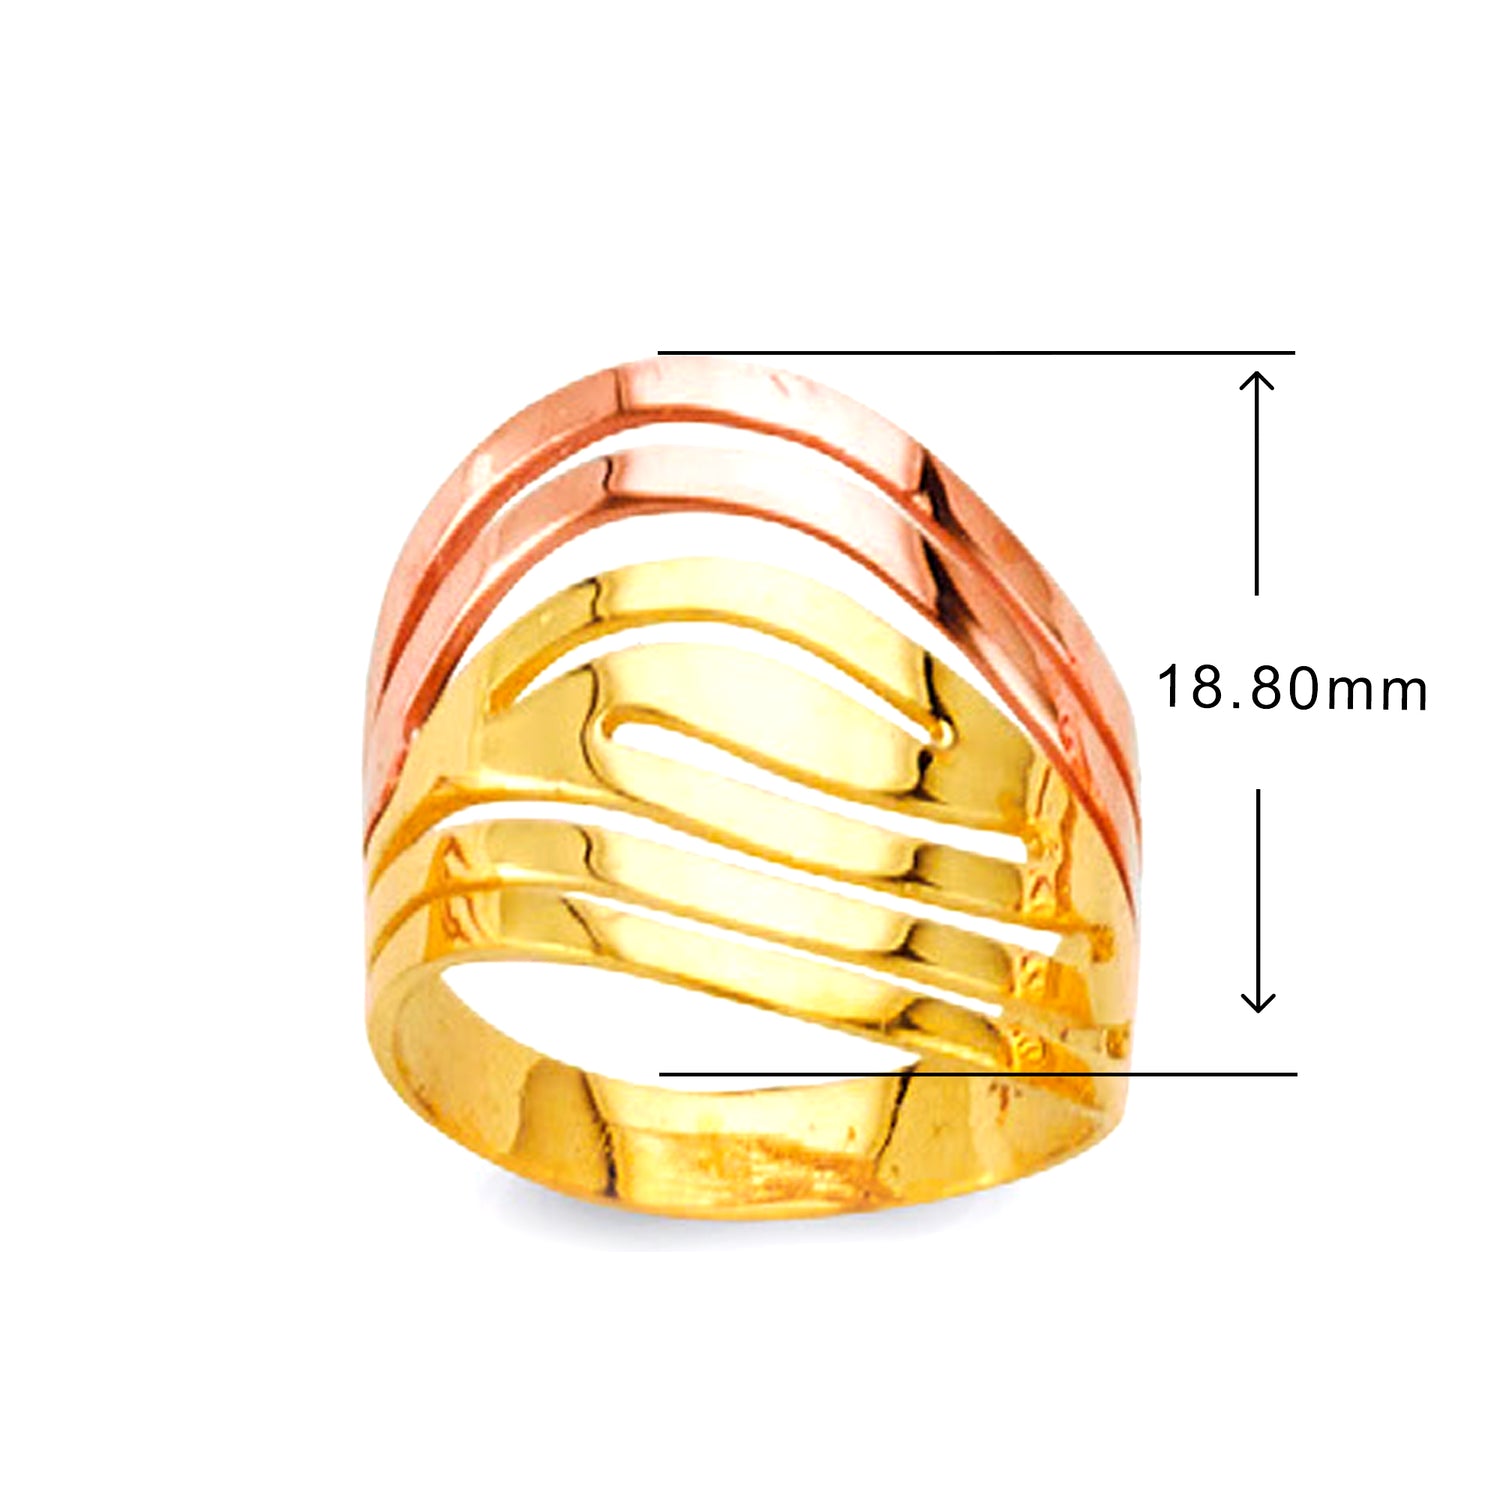 Two Tone Semanario Ring in Solid Gold with Measurement 